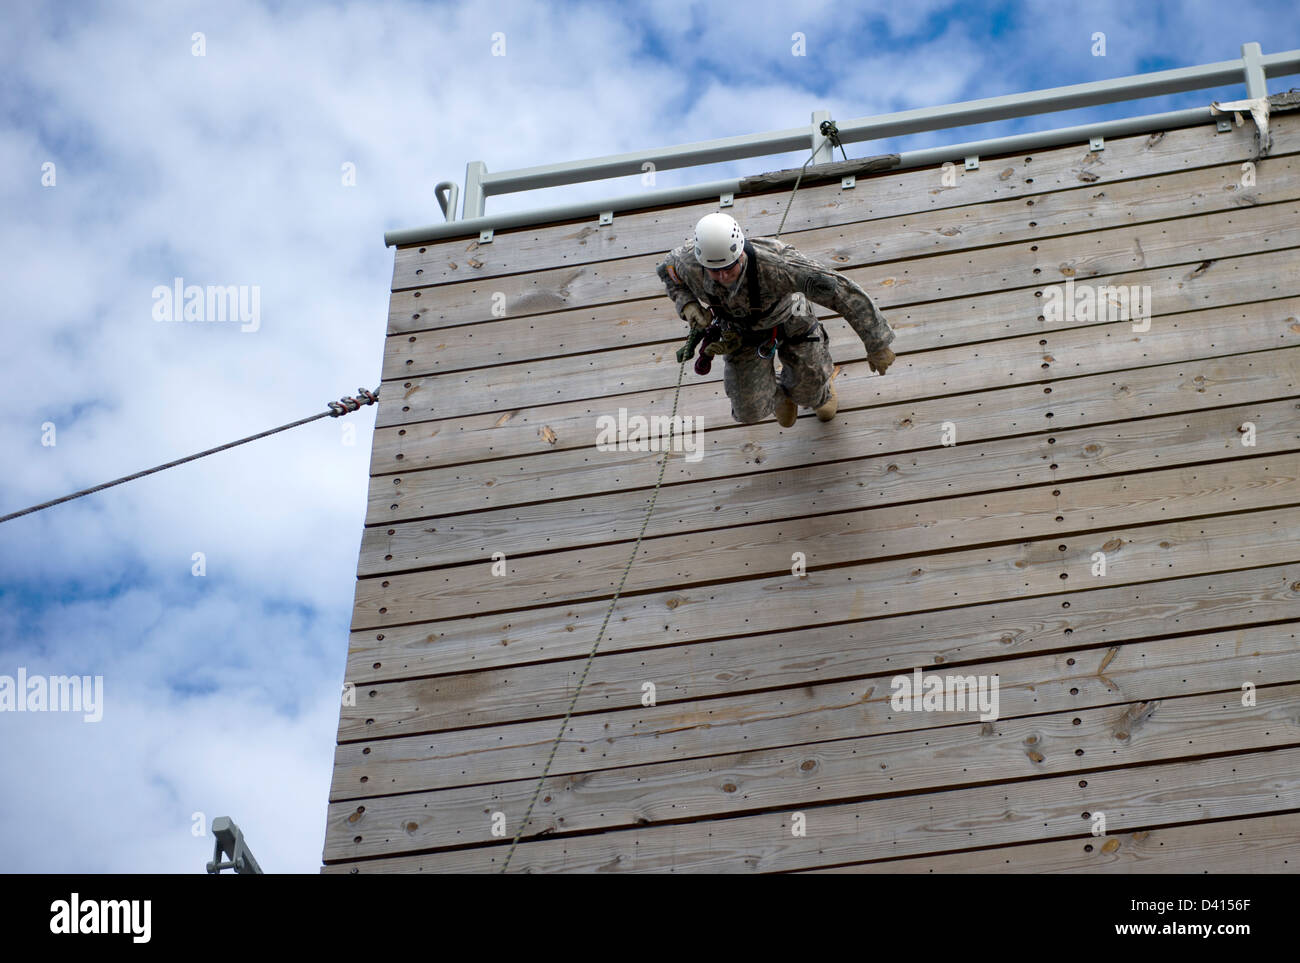 US Green Beret Special Forces soldiers runs down a 40-foot training tower during rappelling training February 4, 2013 at Eglin Base Air Force Base, Florida. Green Berets practiced descending a 40-foot rope and a 40-foot rappelling wall. Stock Photo